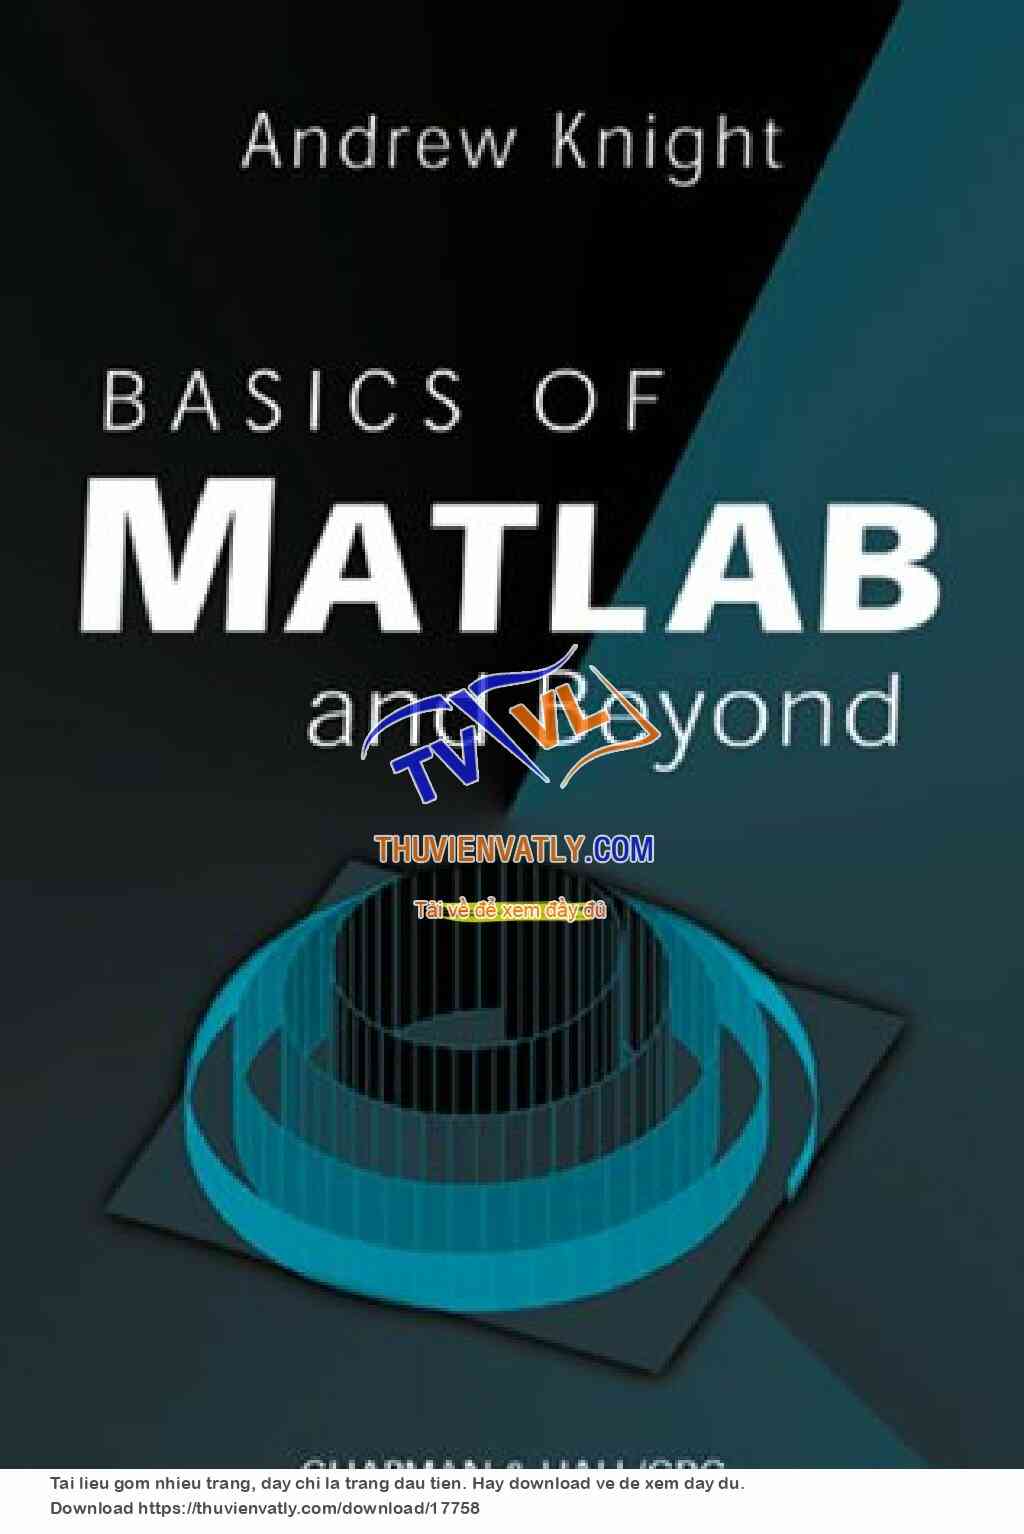 Basics of MATLAB and Beyond - Andrew Knight